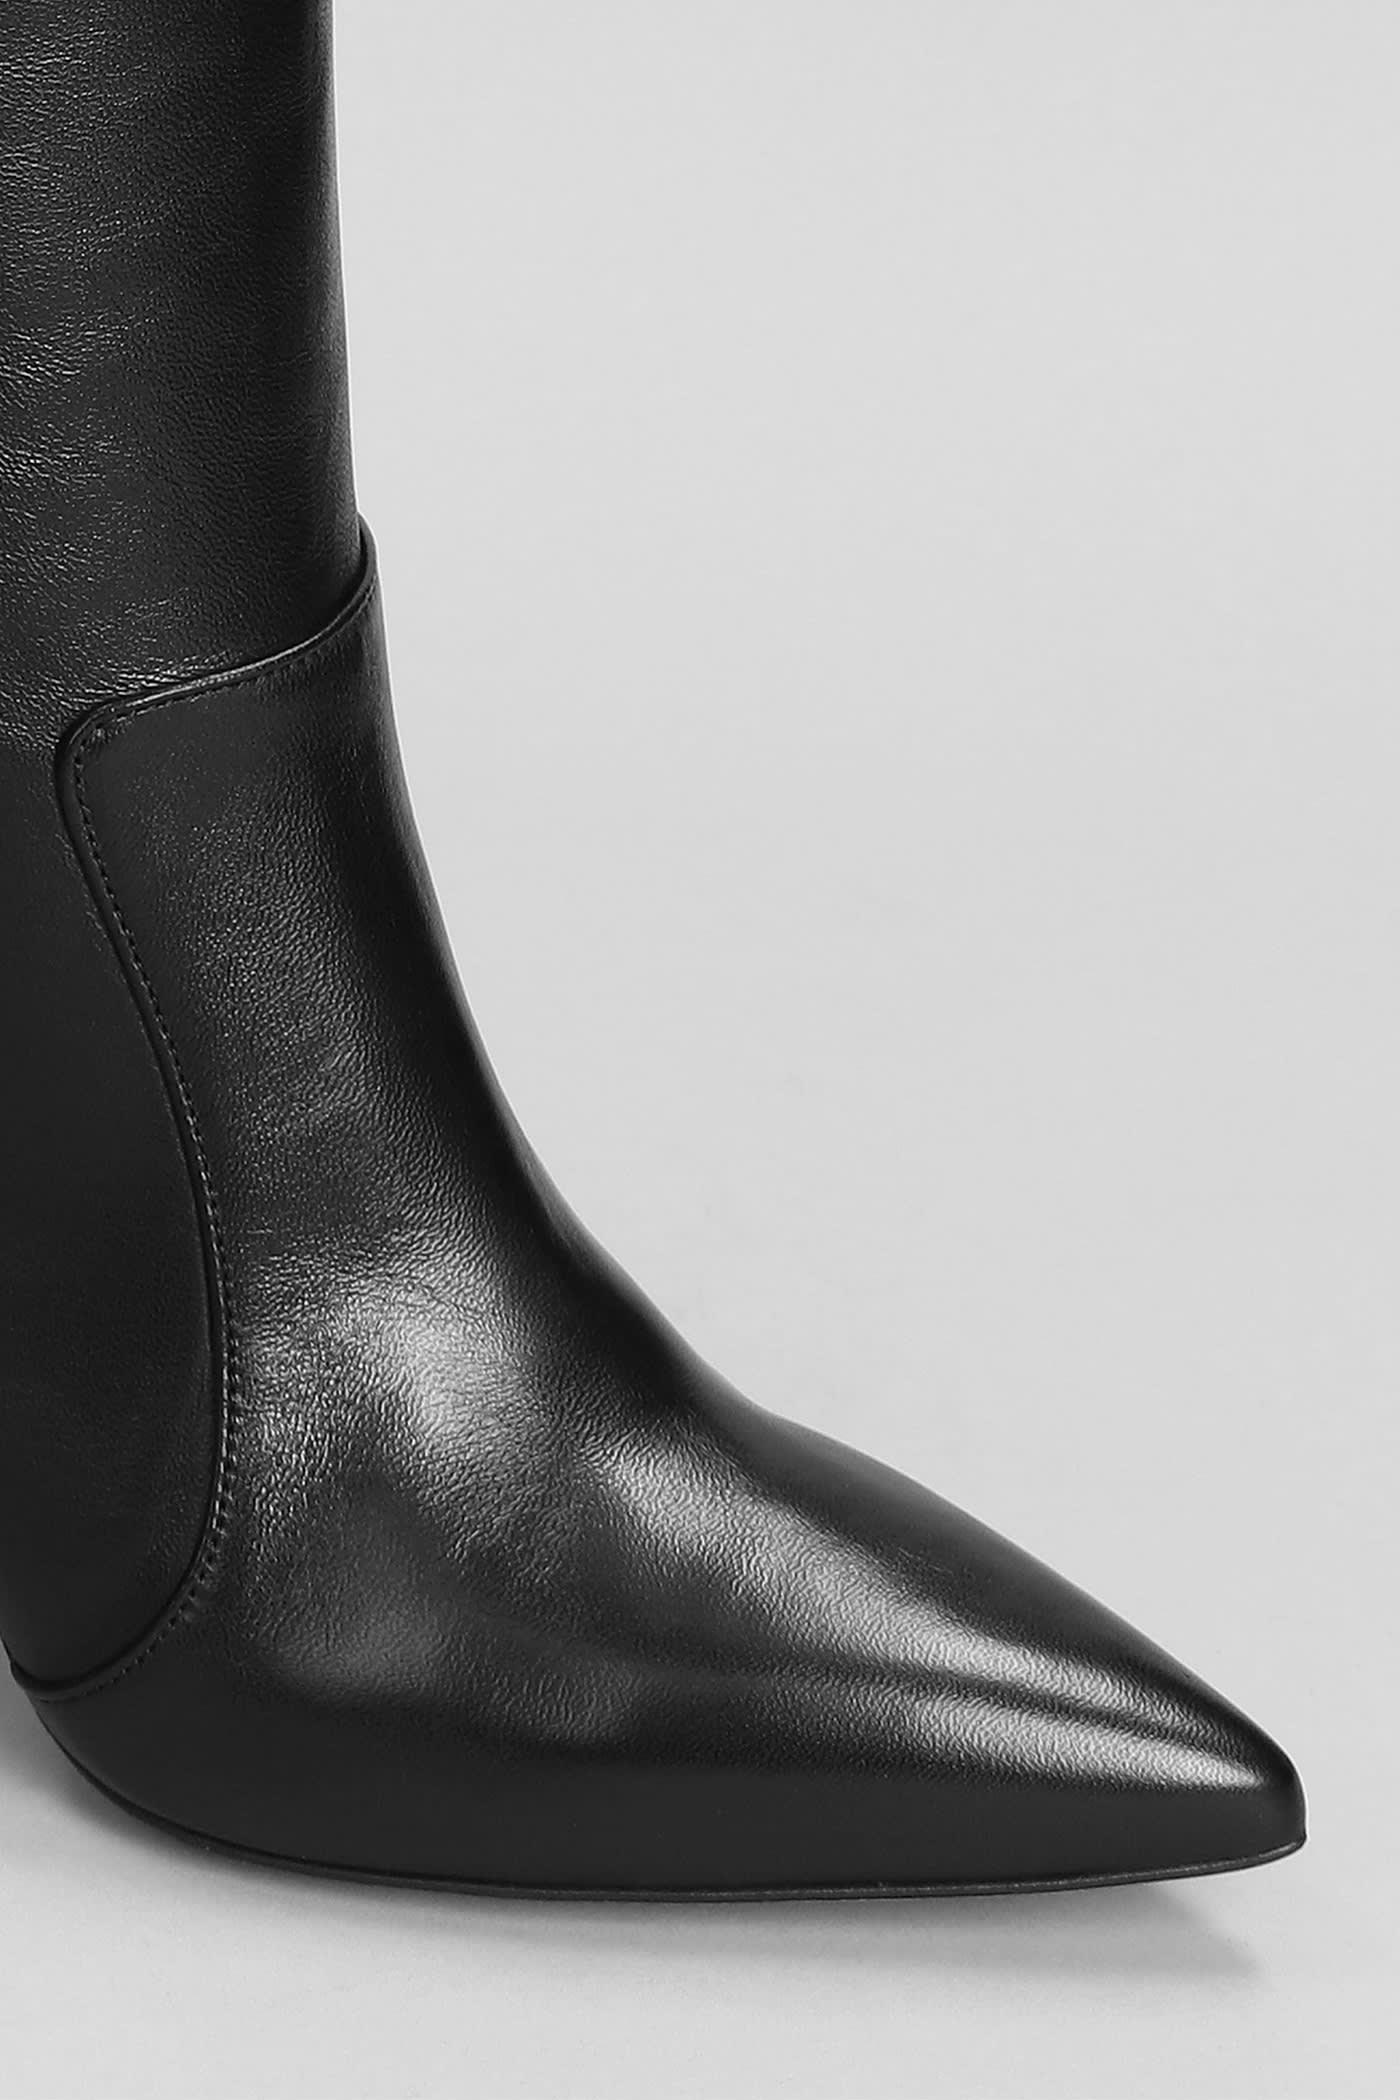 The Seller High Heels Boots In Black Leather | Lyst UK